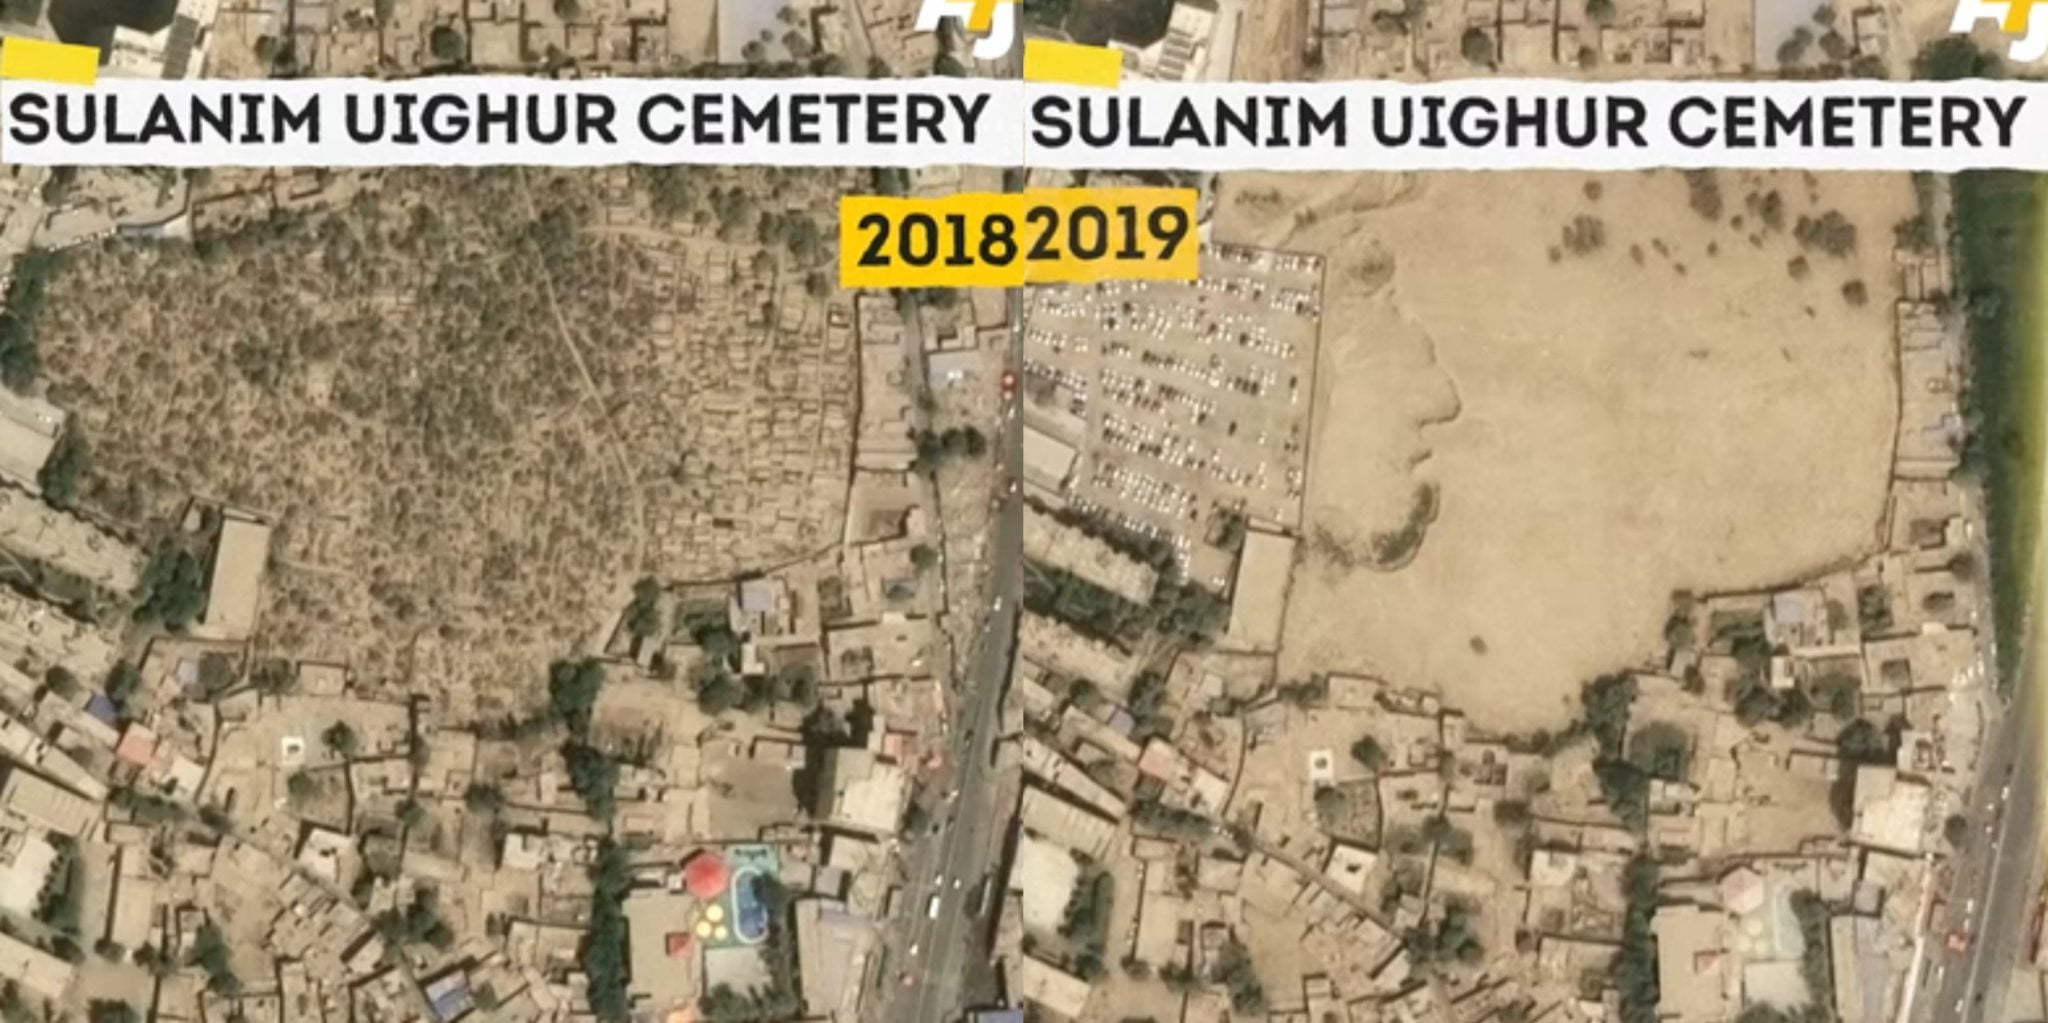 China Has Now Started Destroying Muslim Graveyards